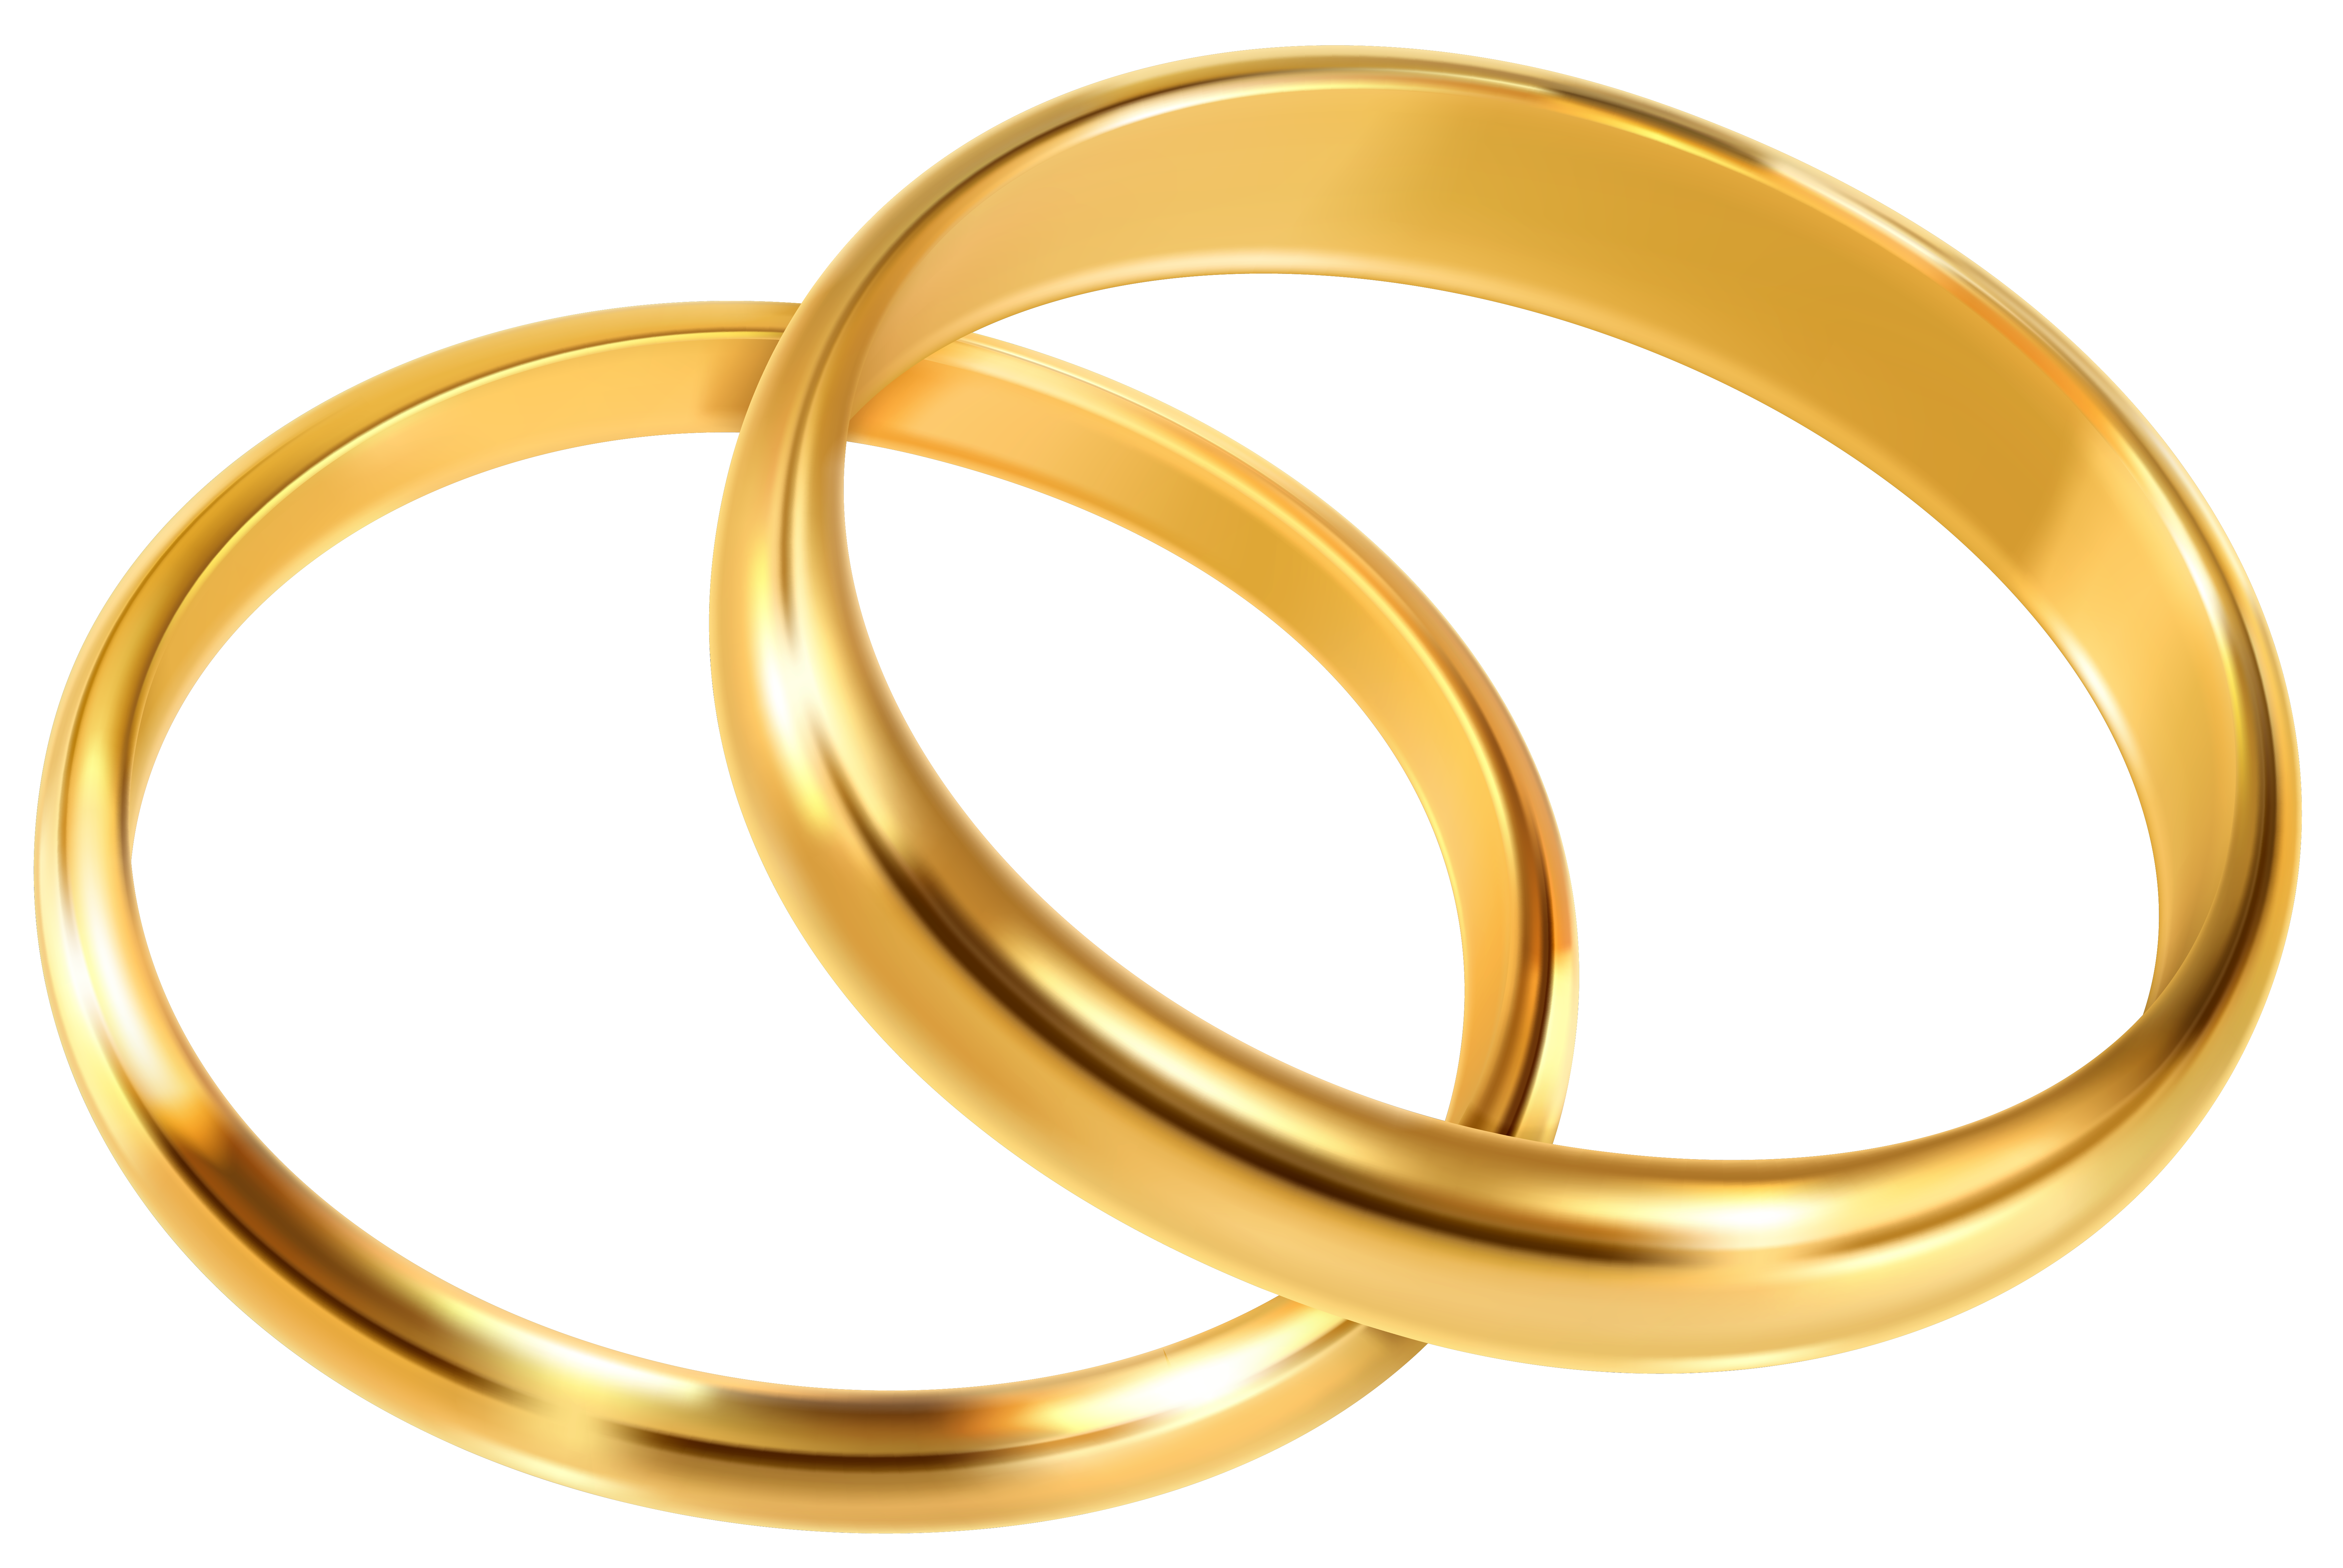 free wedding ring clipart images - photo #41